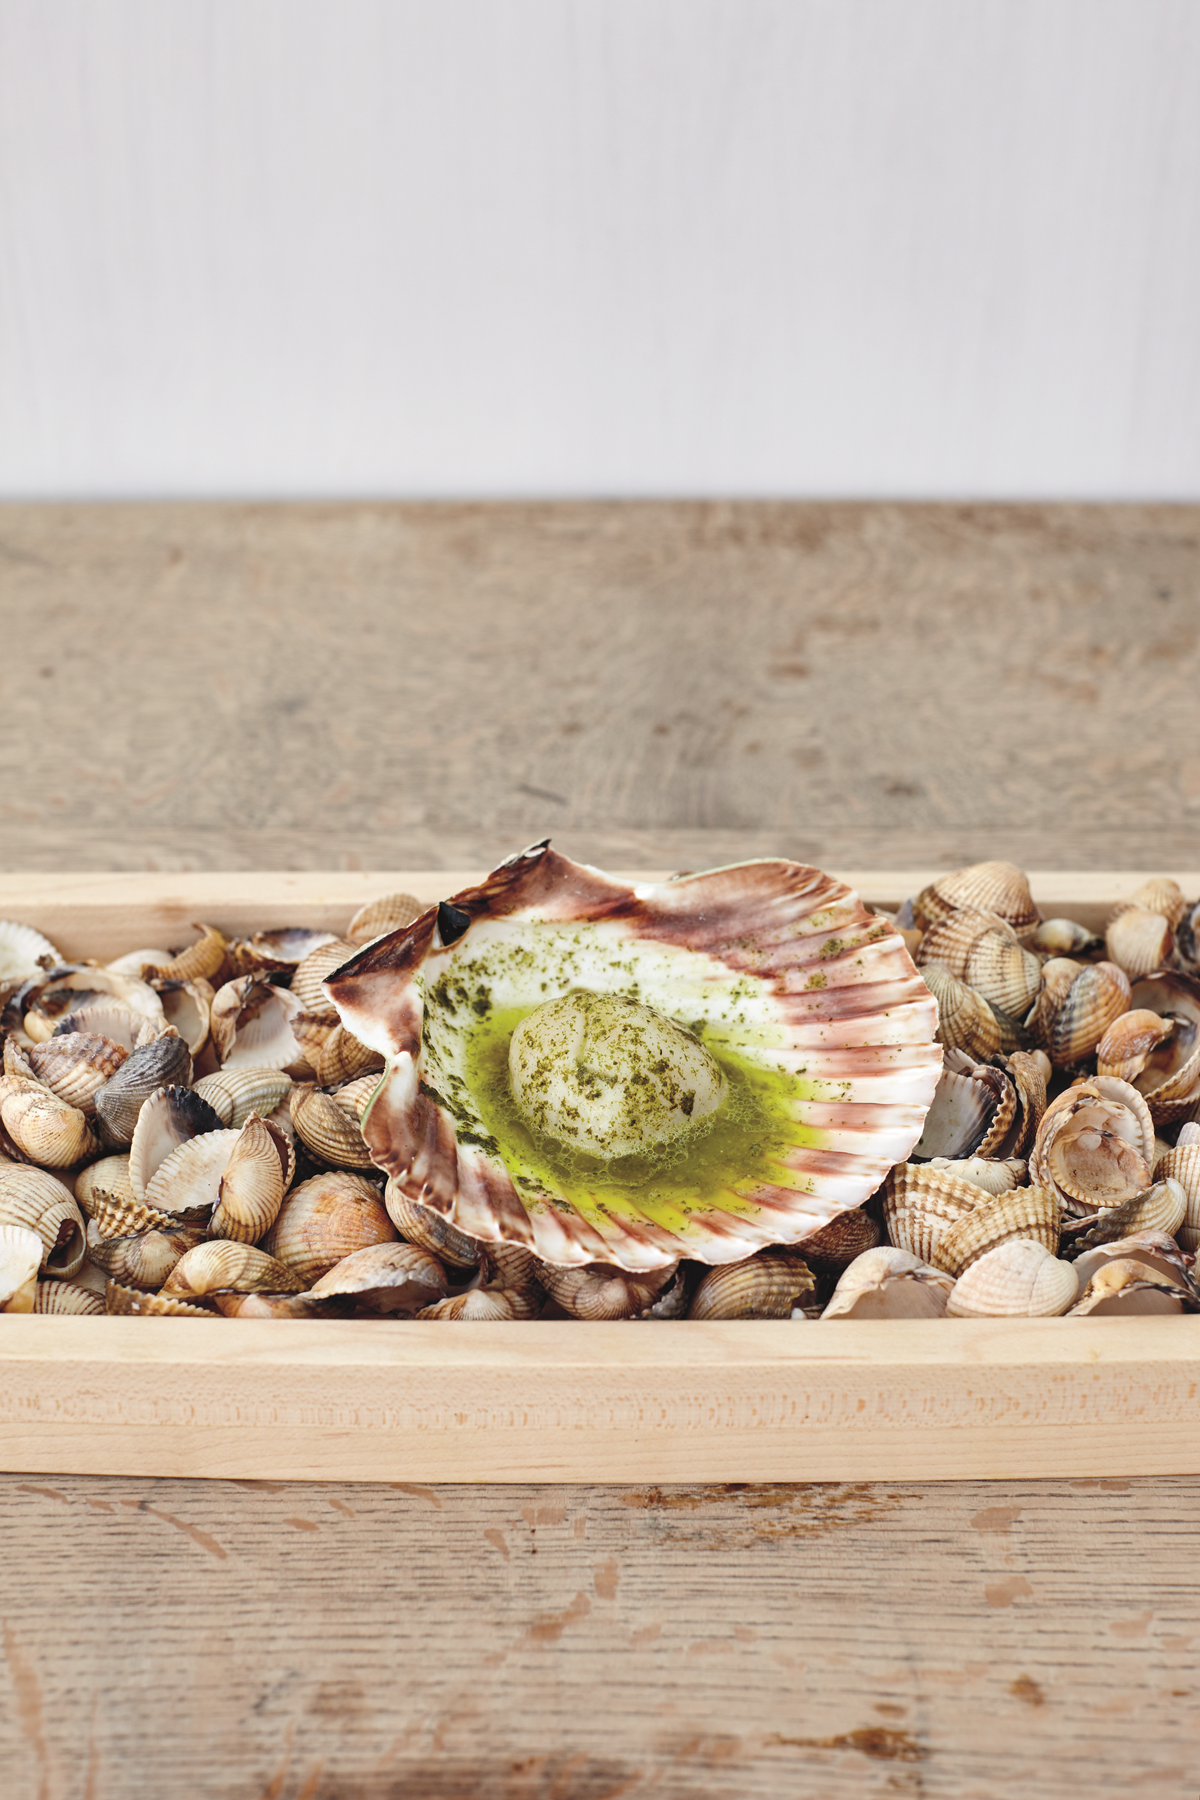 Scallops in seaweed butter, as reproduced in The Sportsman